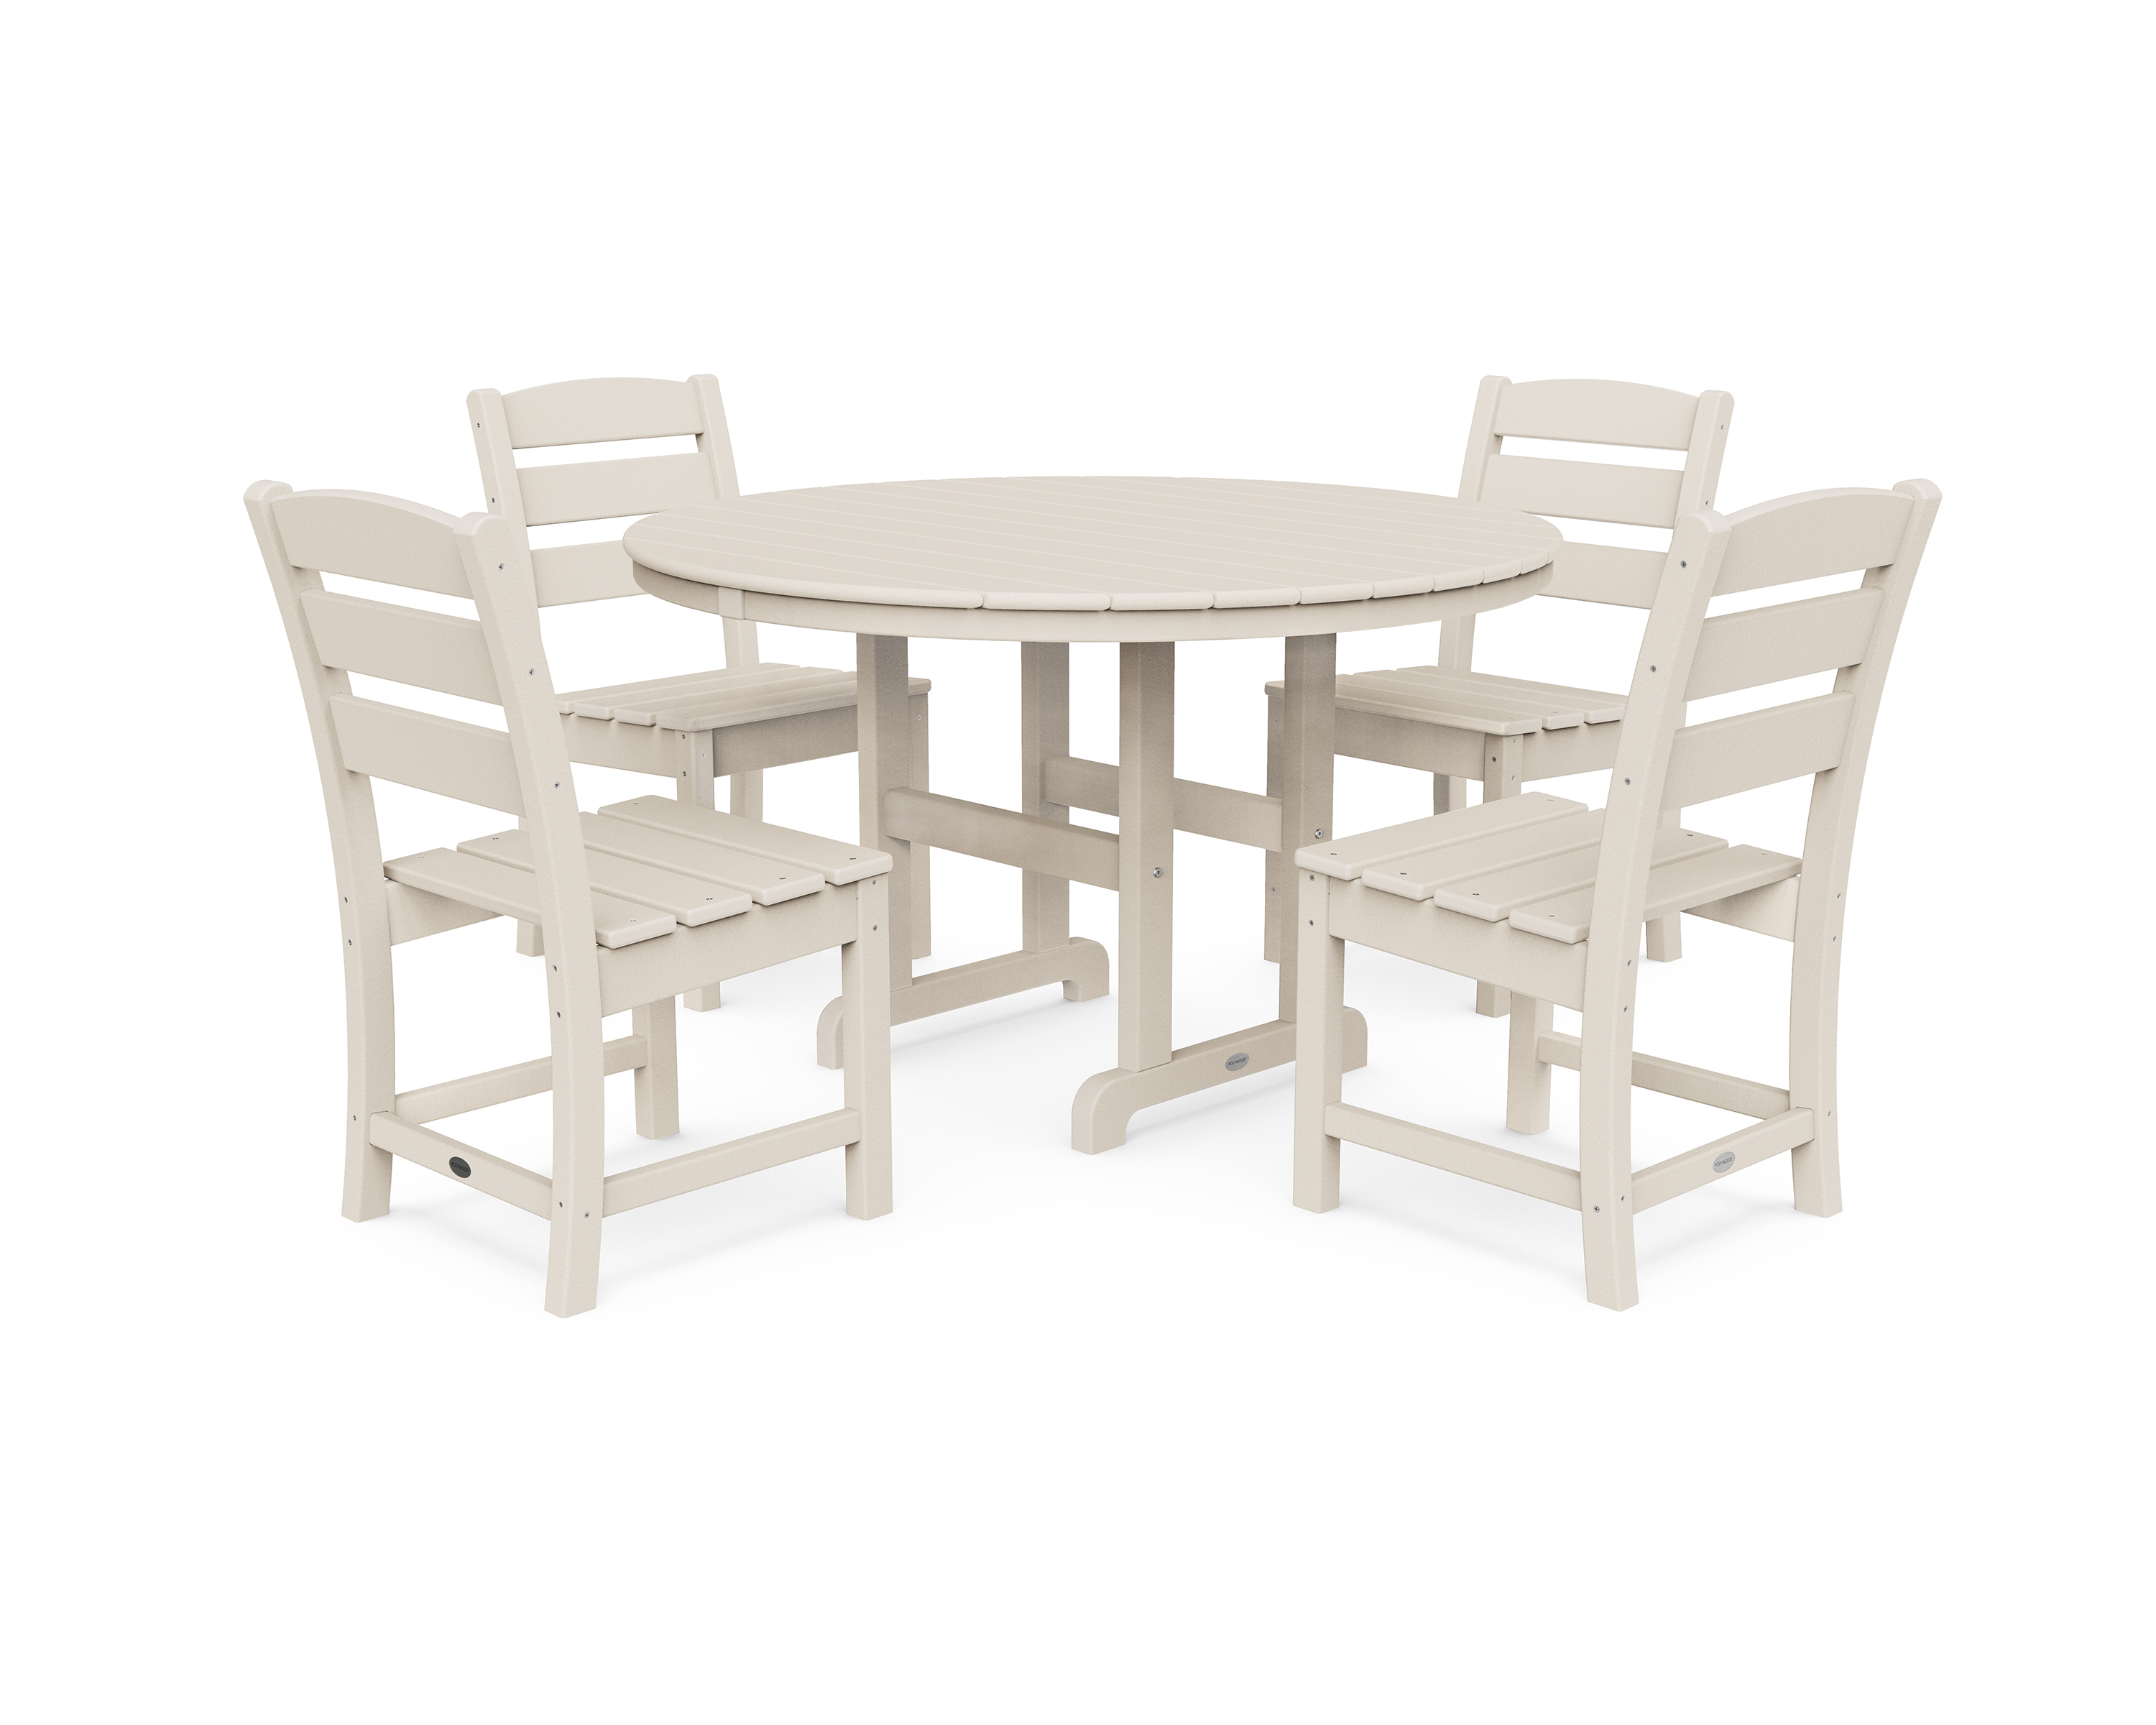 POLYWOOD Lakeside 5-Piece Round Side Chair Dining Set in Sand - image 1 of 1